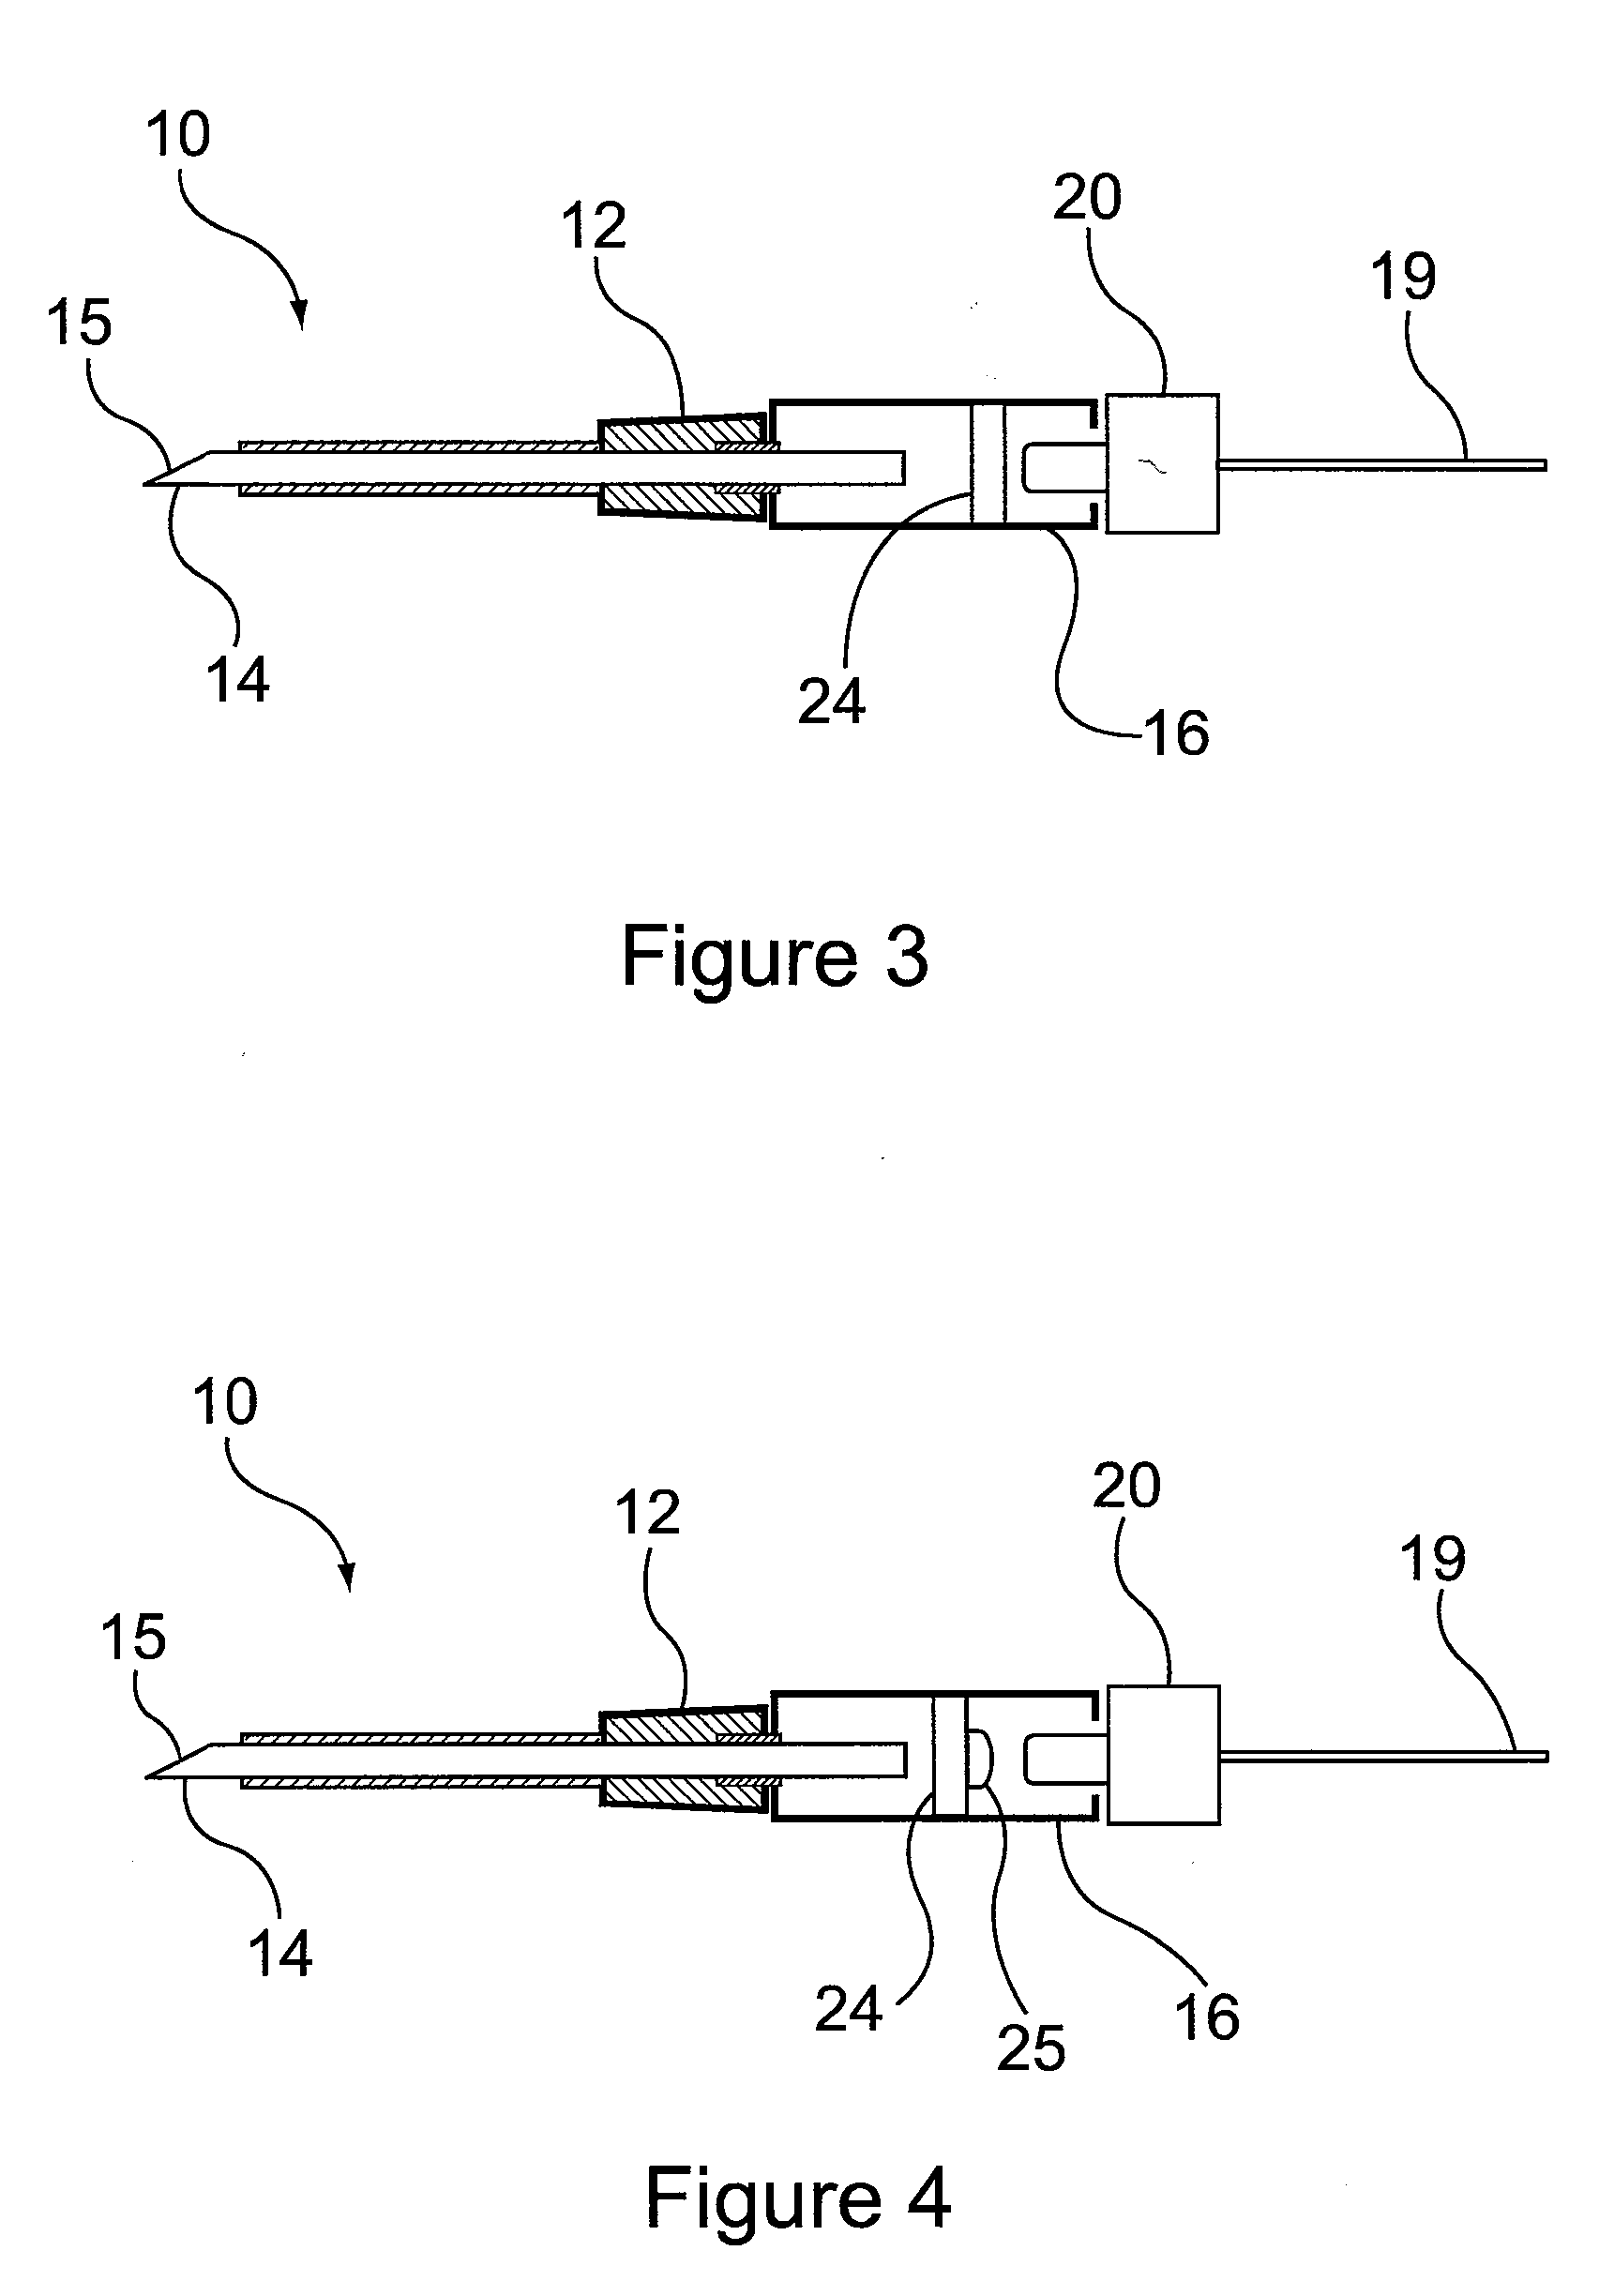 Method and apparatus for detection of catheter location for intravenous access